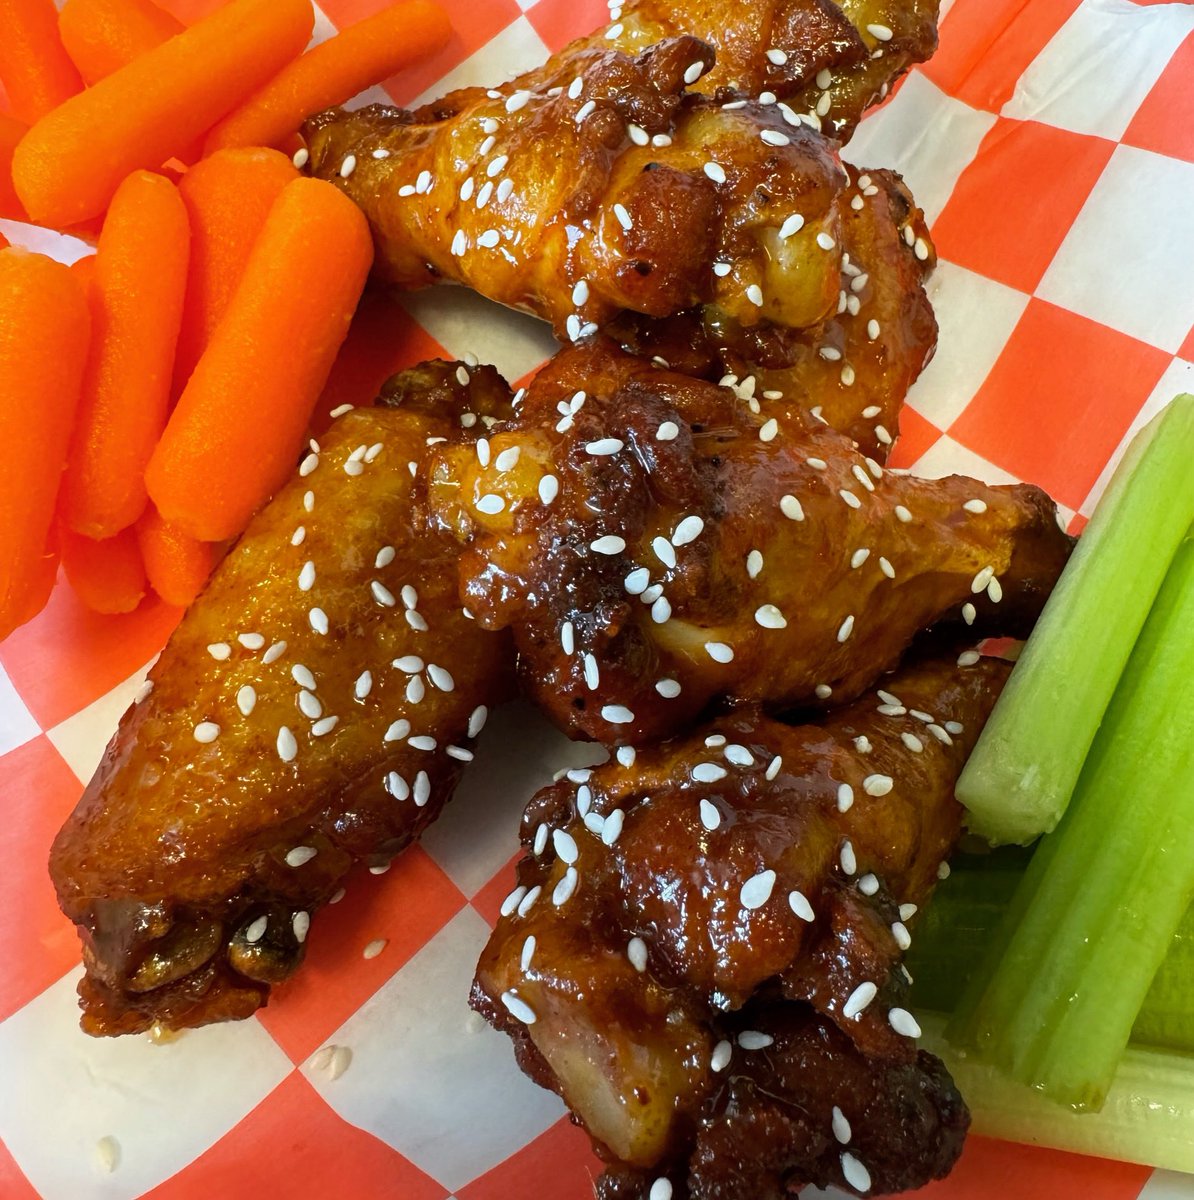 It’s your last chance to get the March special Sweet Spicy Sesame wings! We’ll be at Yorkshire Liquors (5669 Quince Rd, Memphis, TN 38119) 4:00-7:00 tonight. #Choose901 #Memphis #MemphisEats #901Eats #EatLocal #Catering #ILoveMemphis #EdibleMemphis #BestOfMemphis